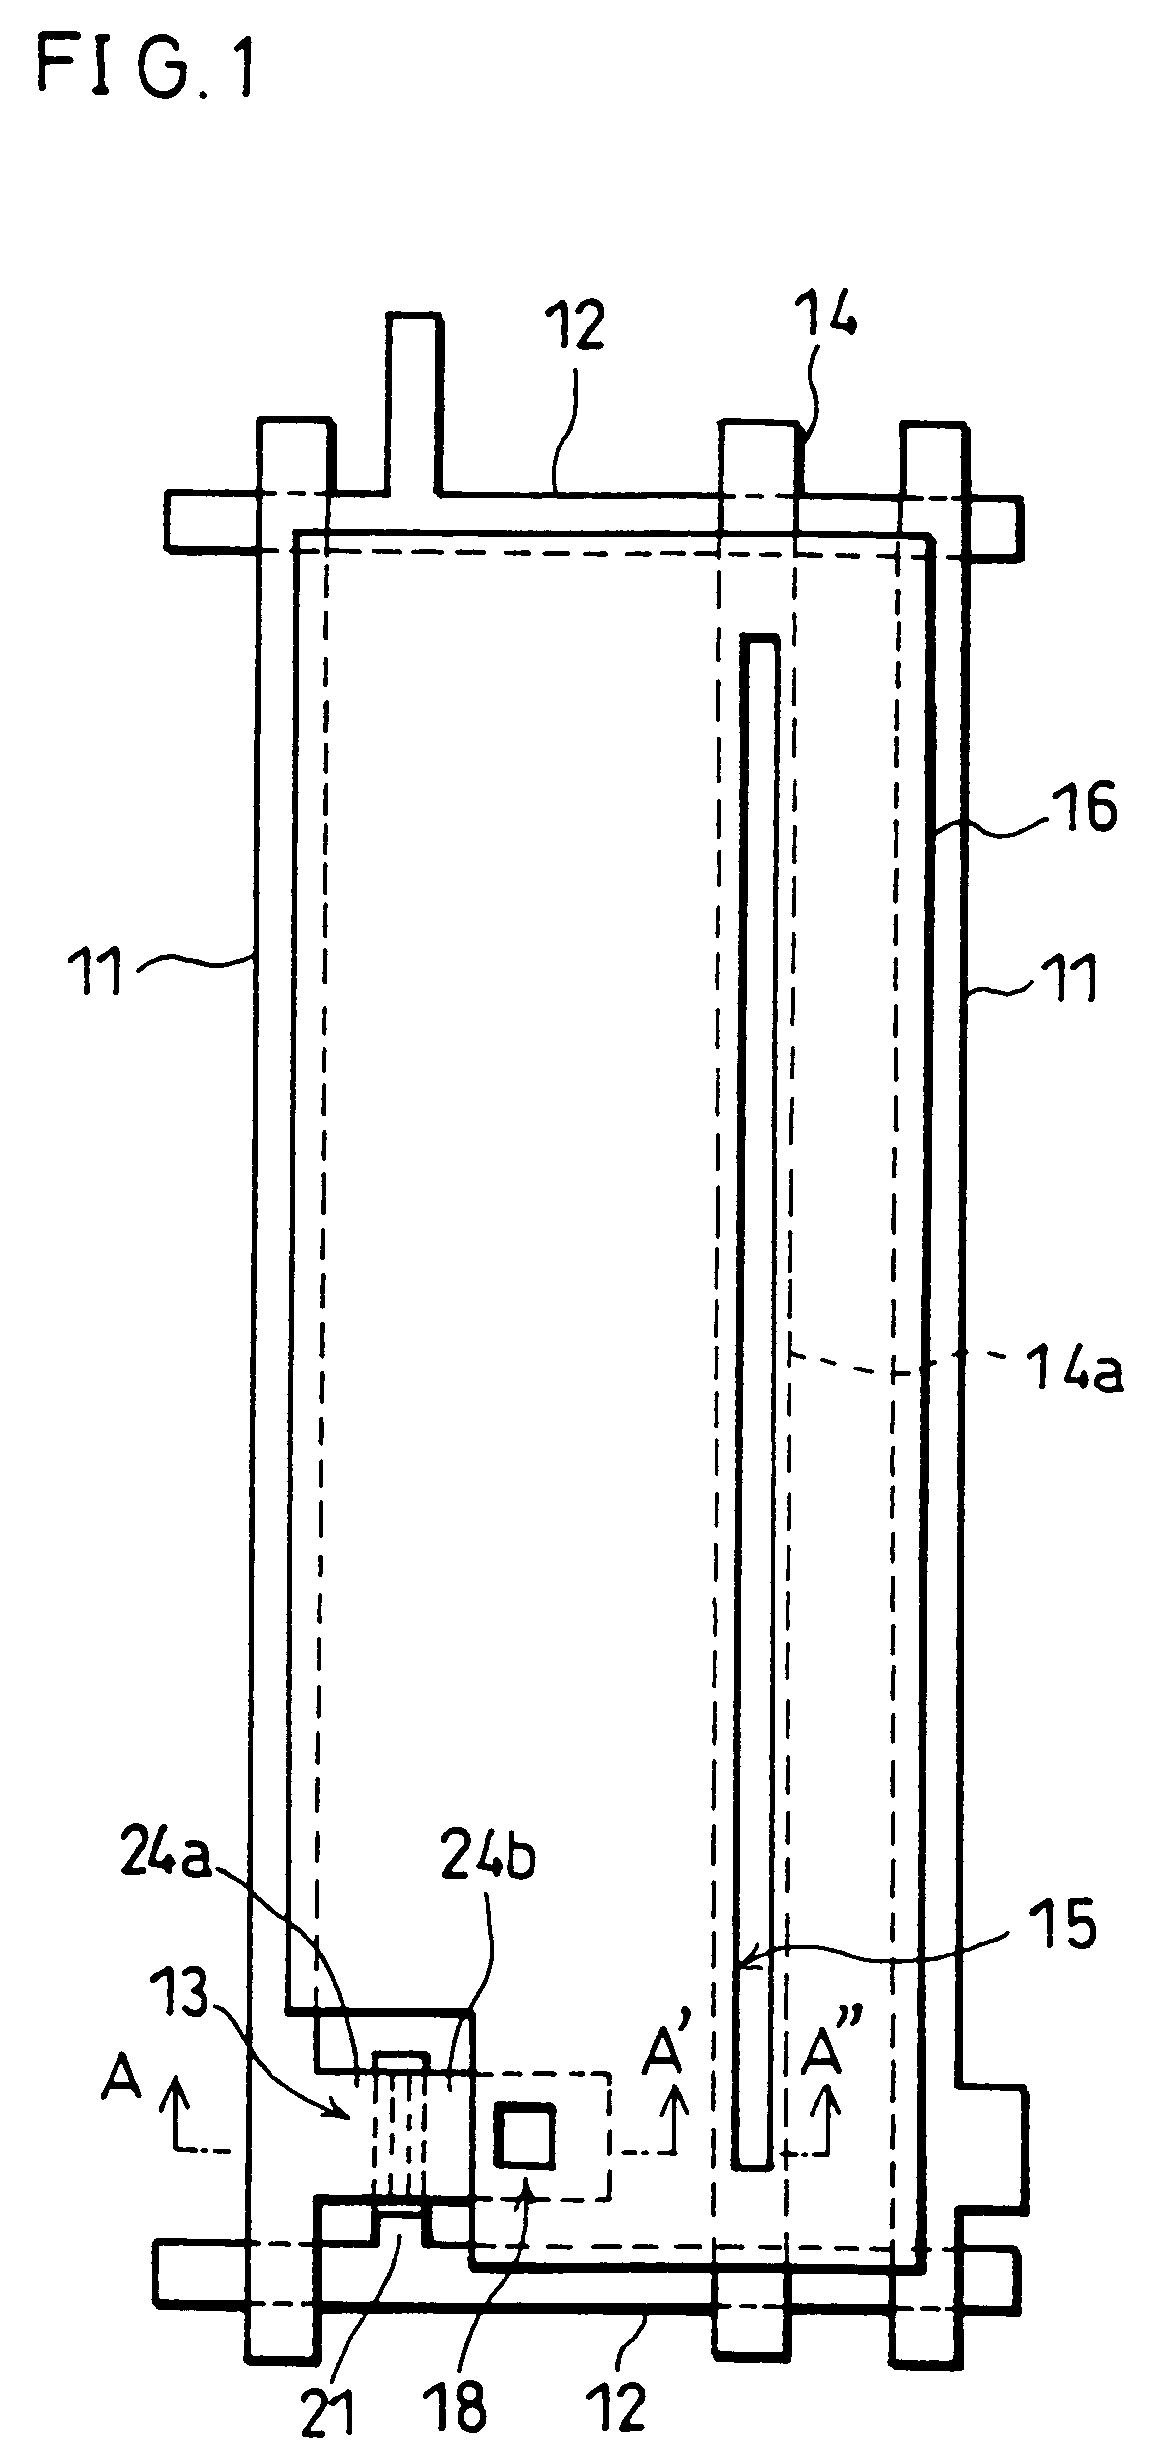 Active matrix substrate, method of manufacturing the same, and image sensor incorporating the same